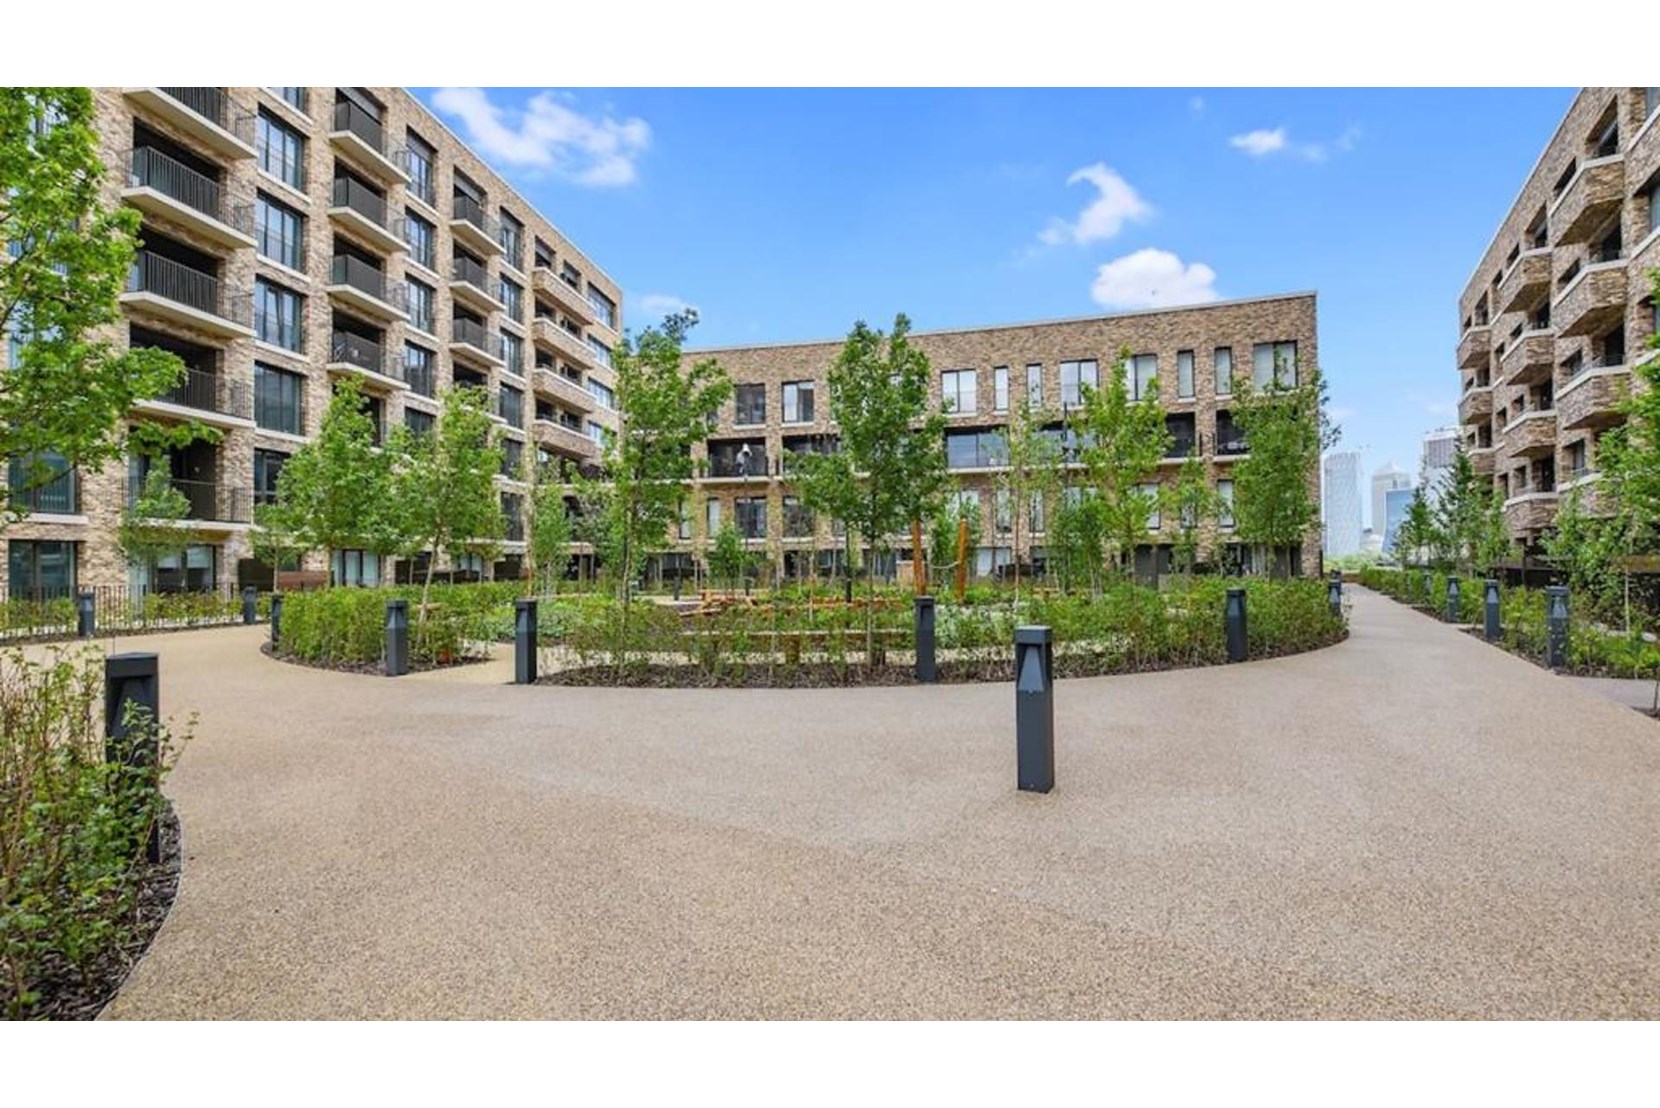 Apartments to Rent by Folio at Porter's Edge, Southwark, SE16, communal gardens